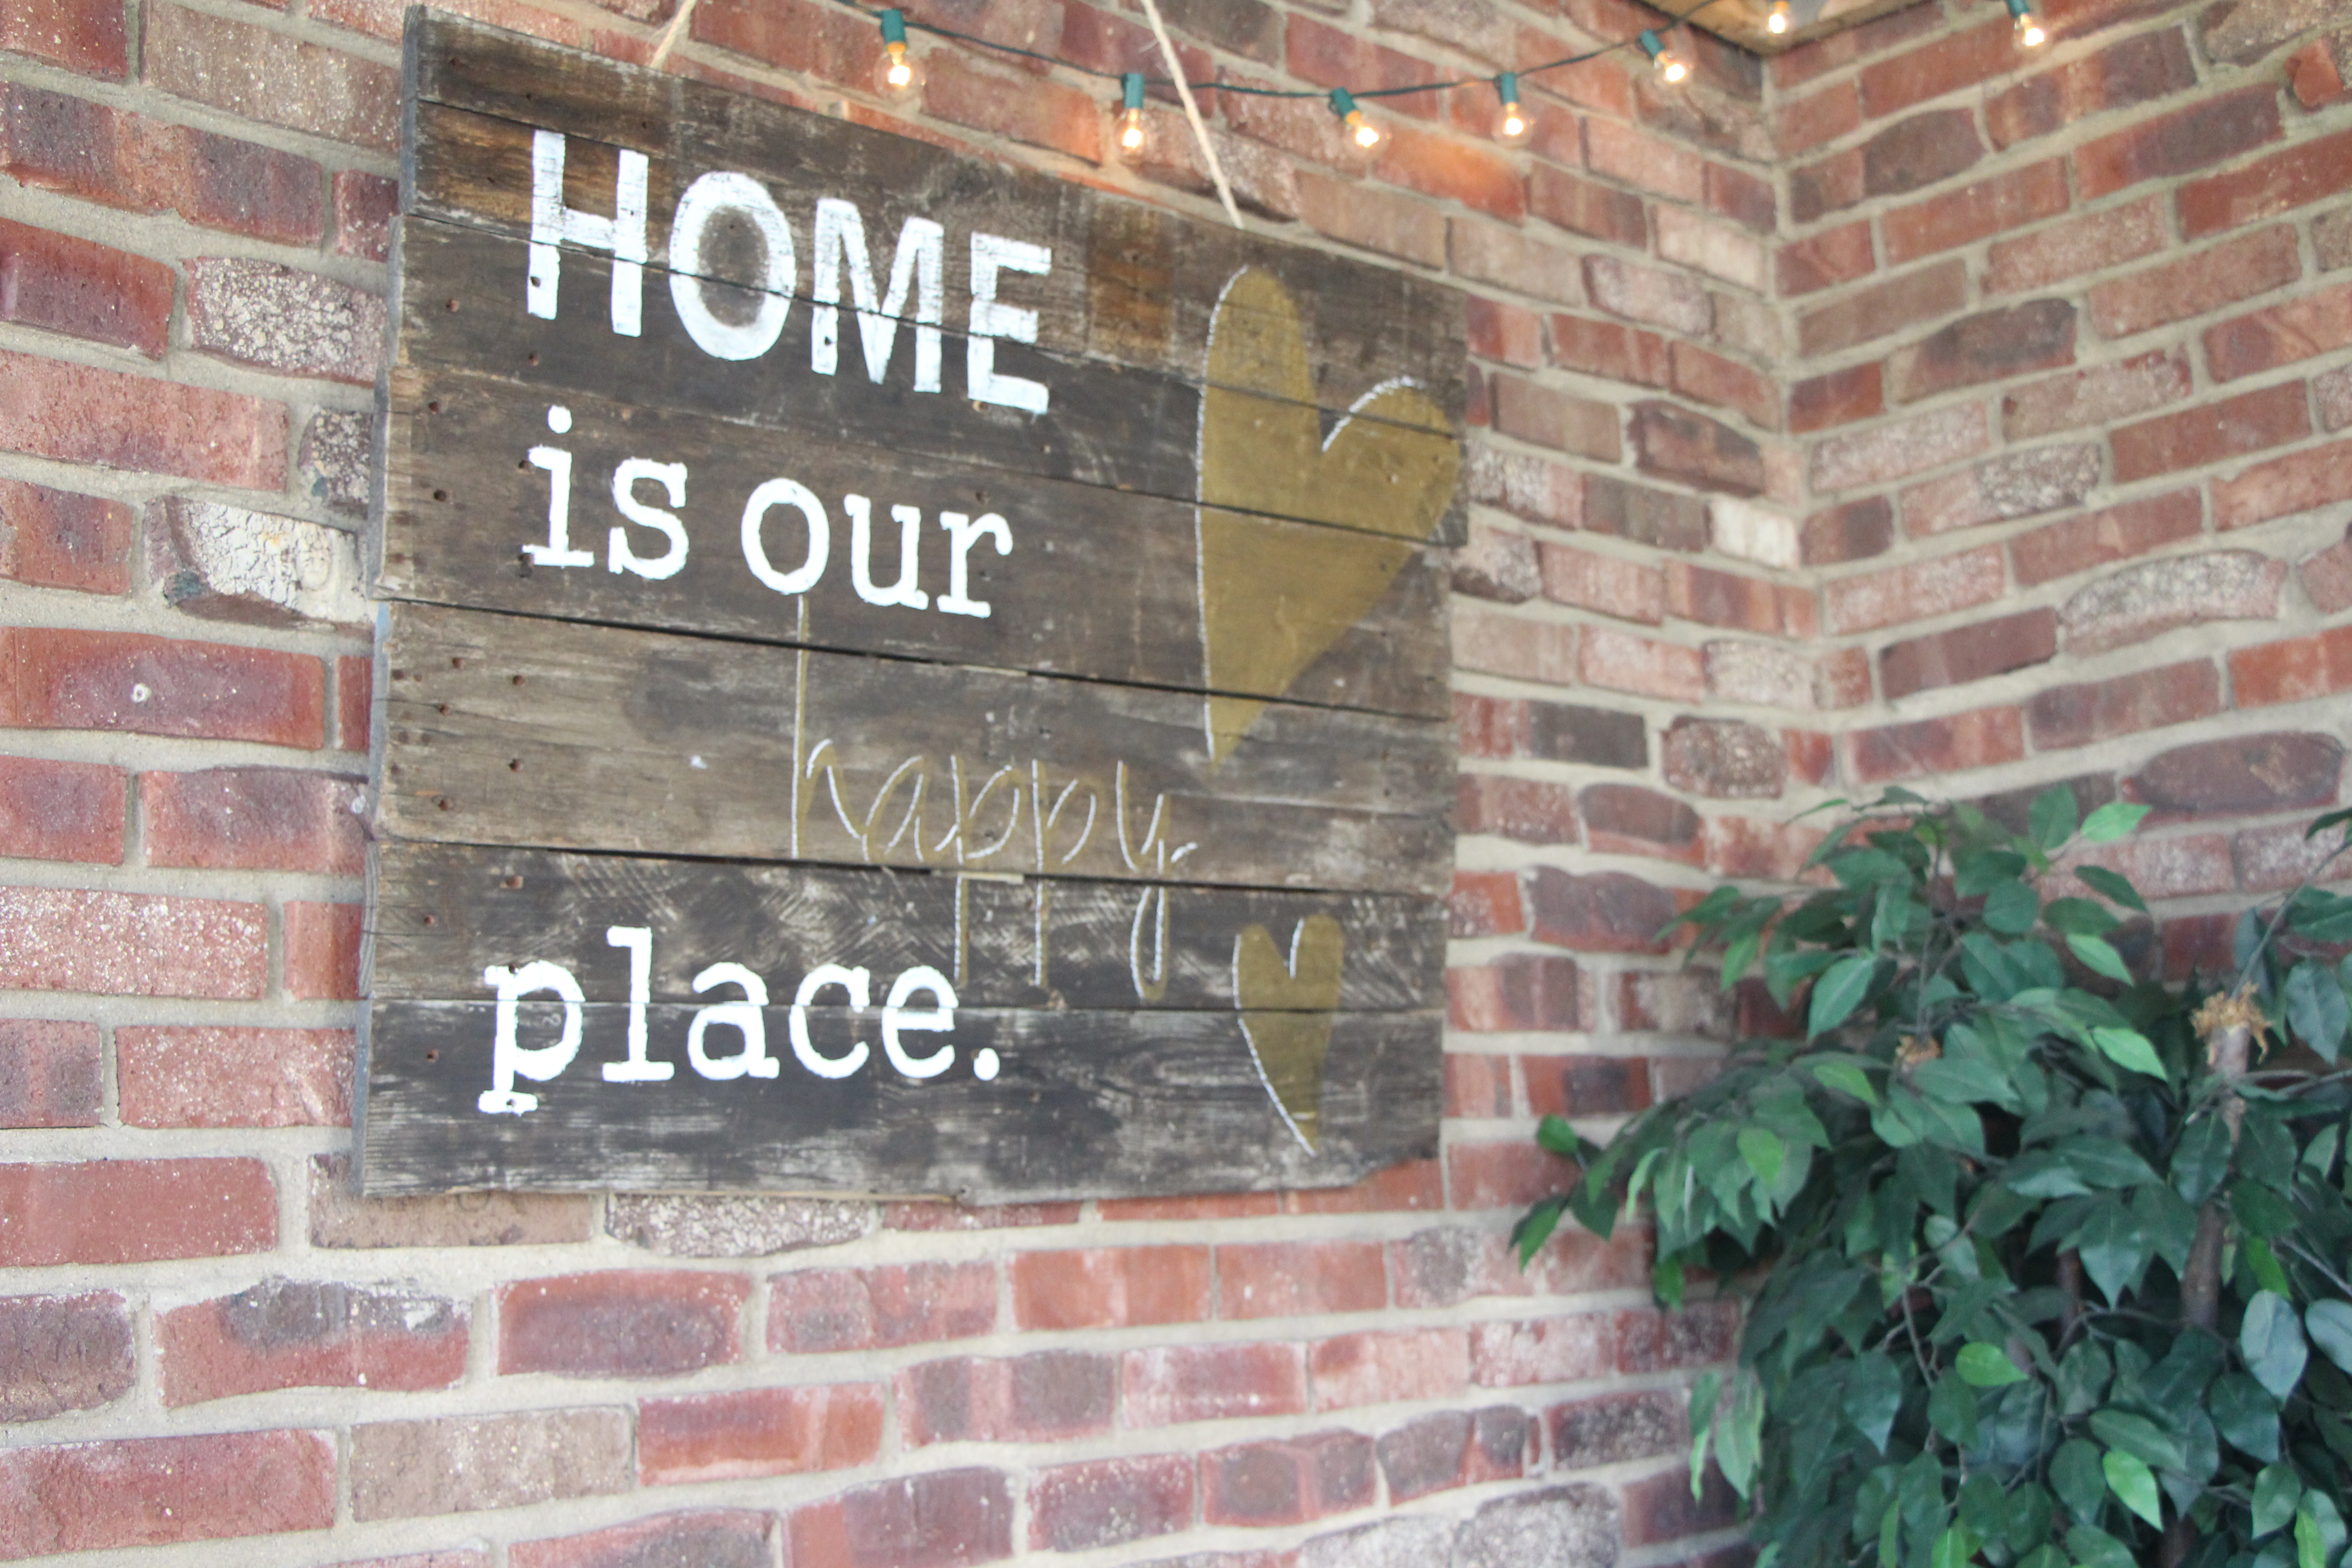 Outdoor curtains | outdoor oasis | backyard patio | This is our Bliss | DIY pallet sign